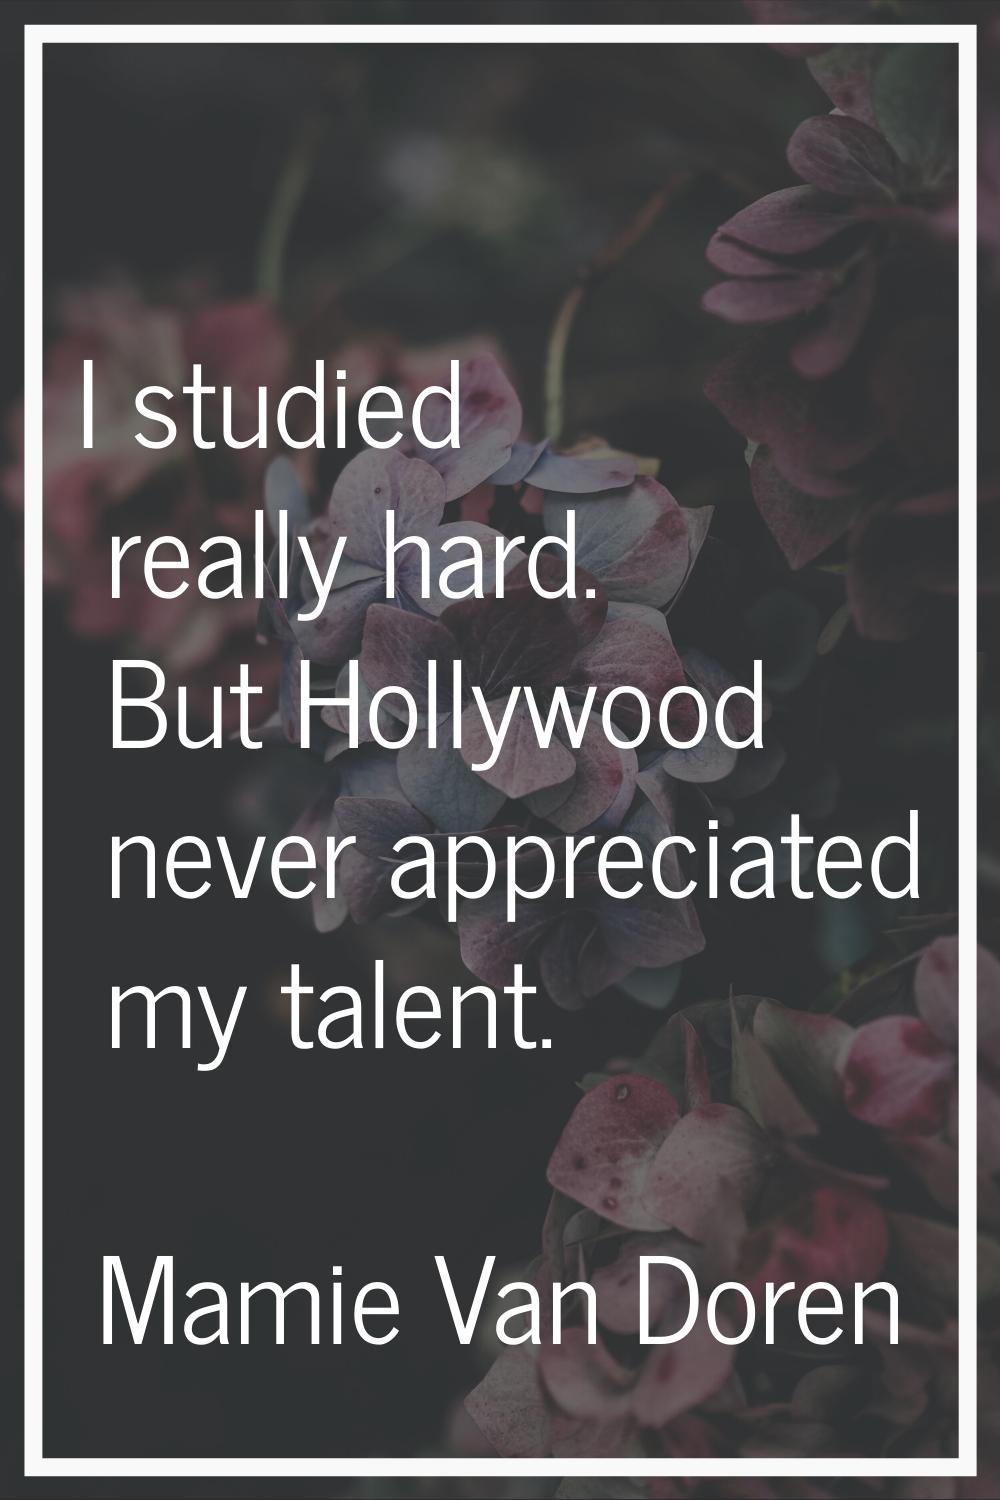 I studied really hard. But Hollywood never appreciated my talent.